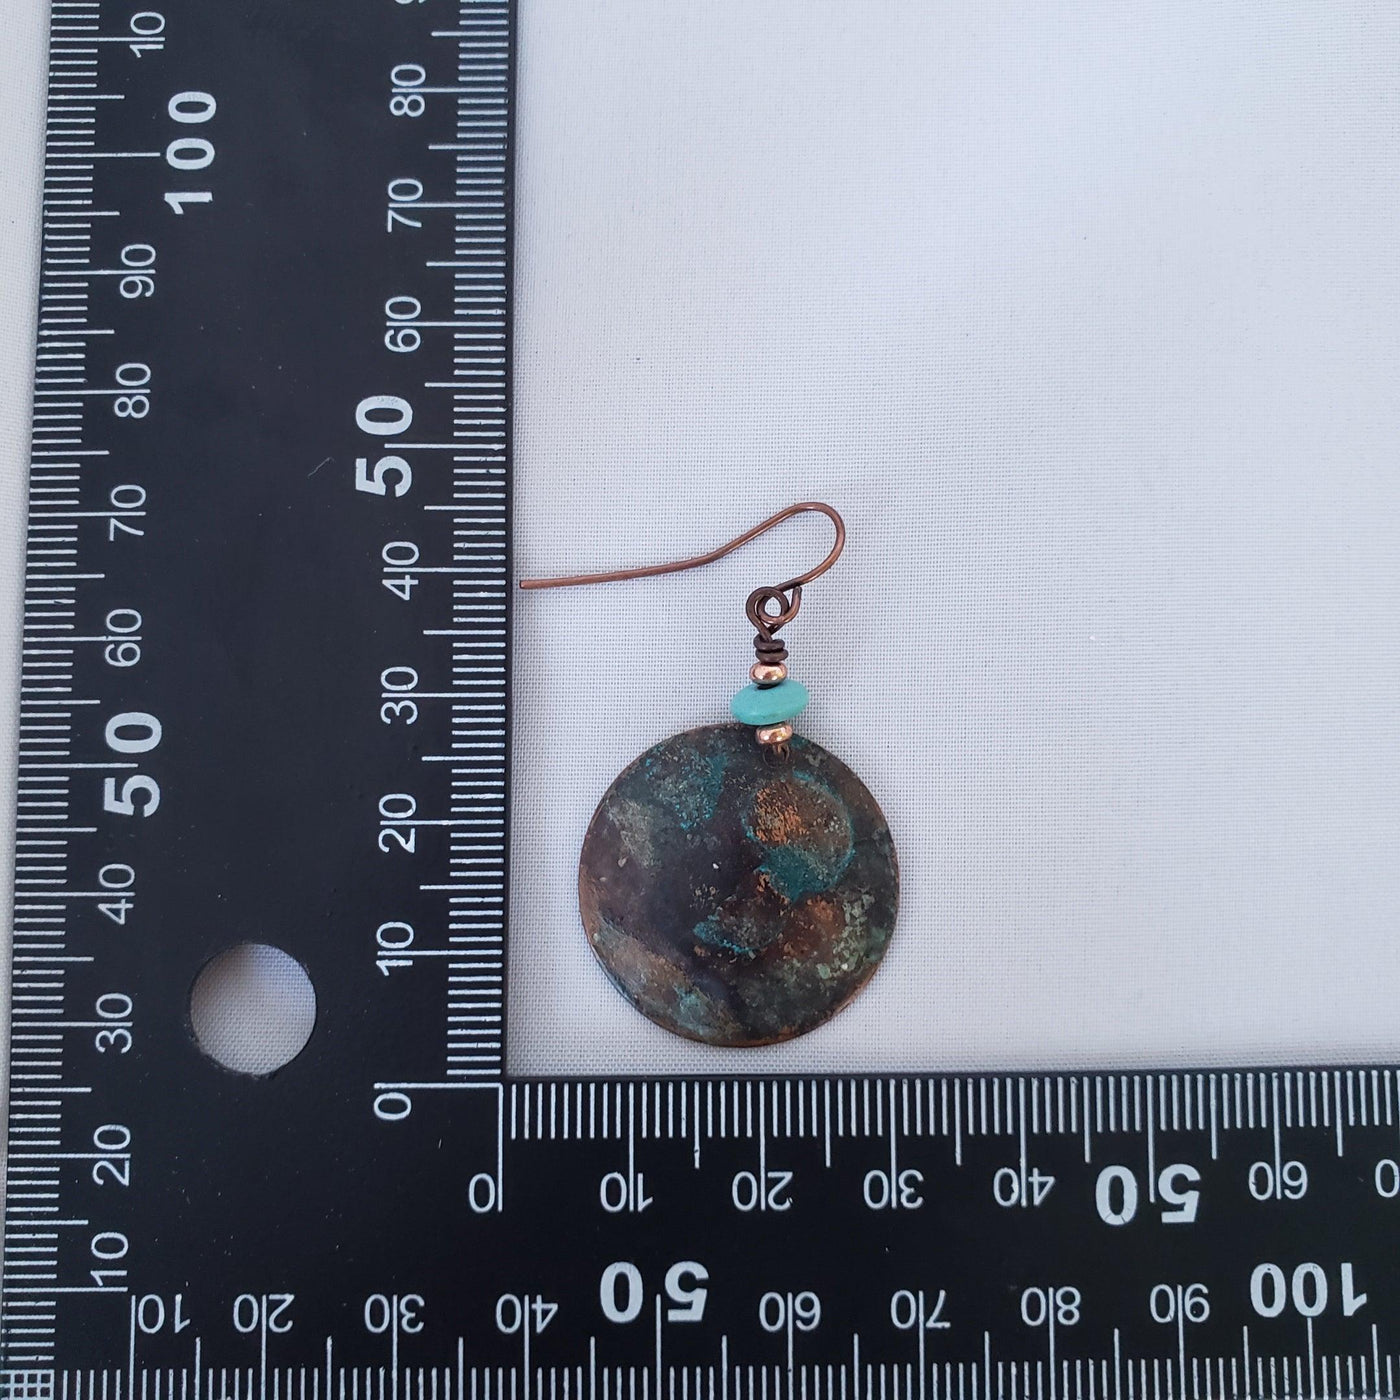 Copper Patina and Turquoise Earrings